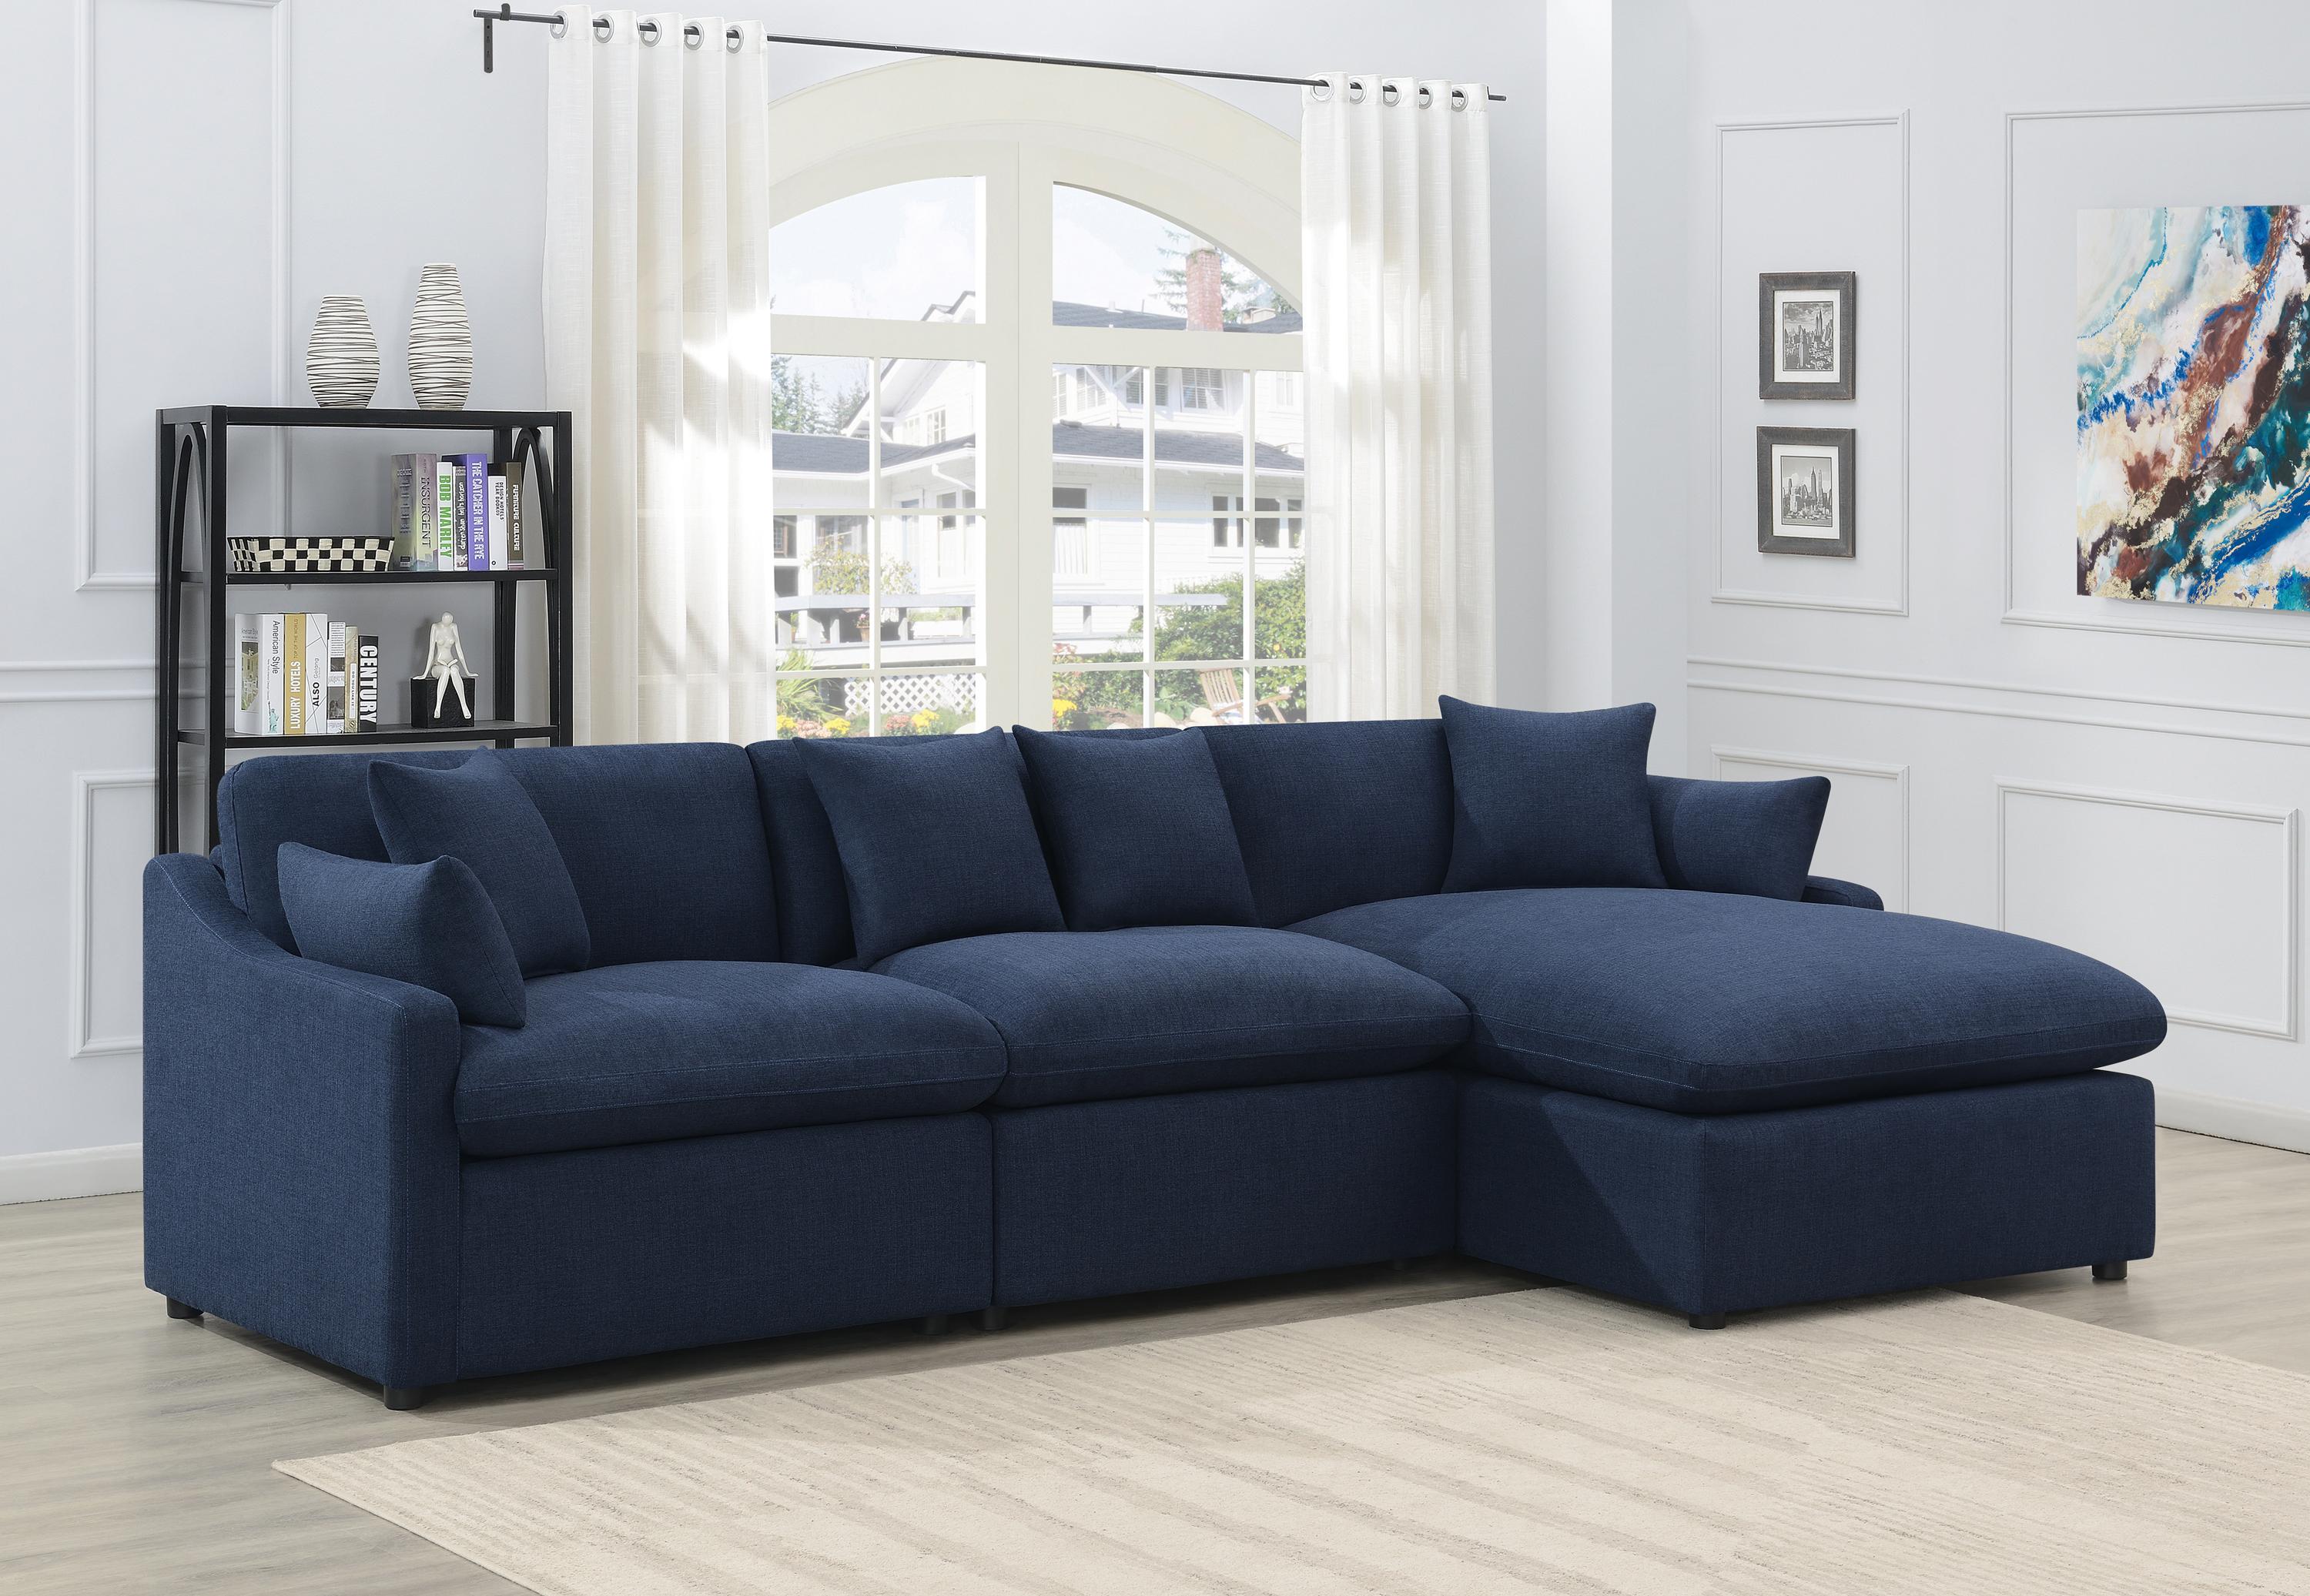 Transitional Power Sectional 651551P-S3 Destino 651551P-S3 in Blue 